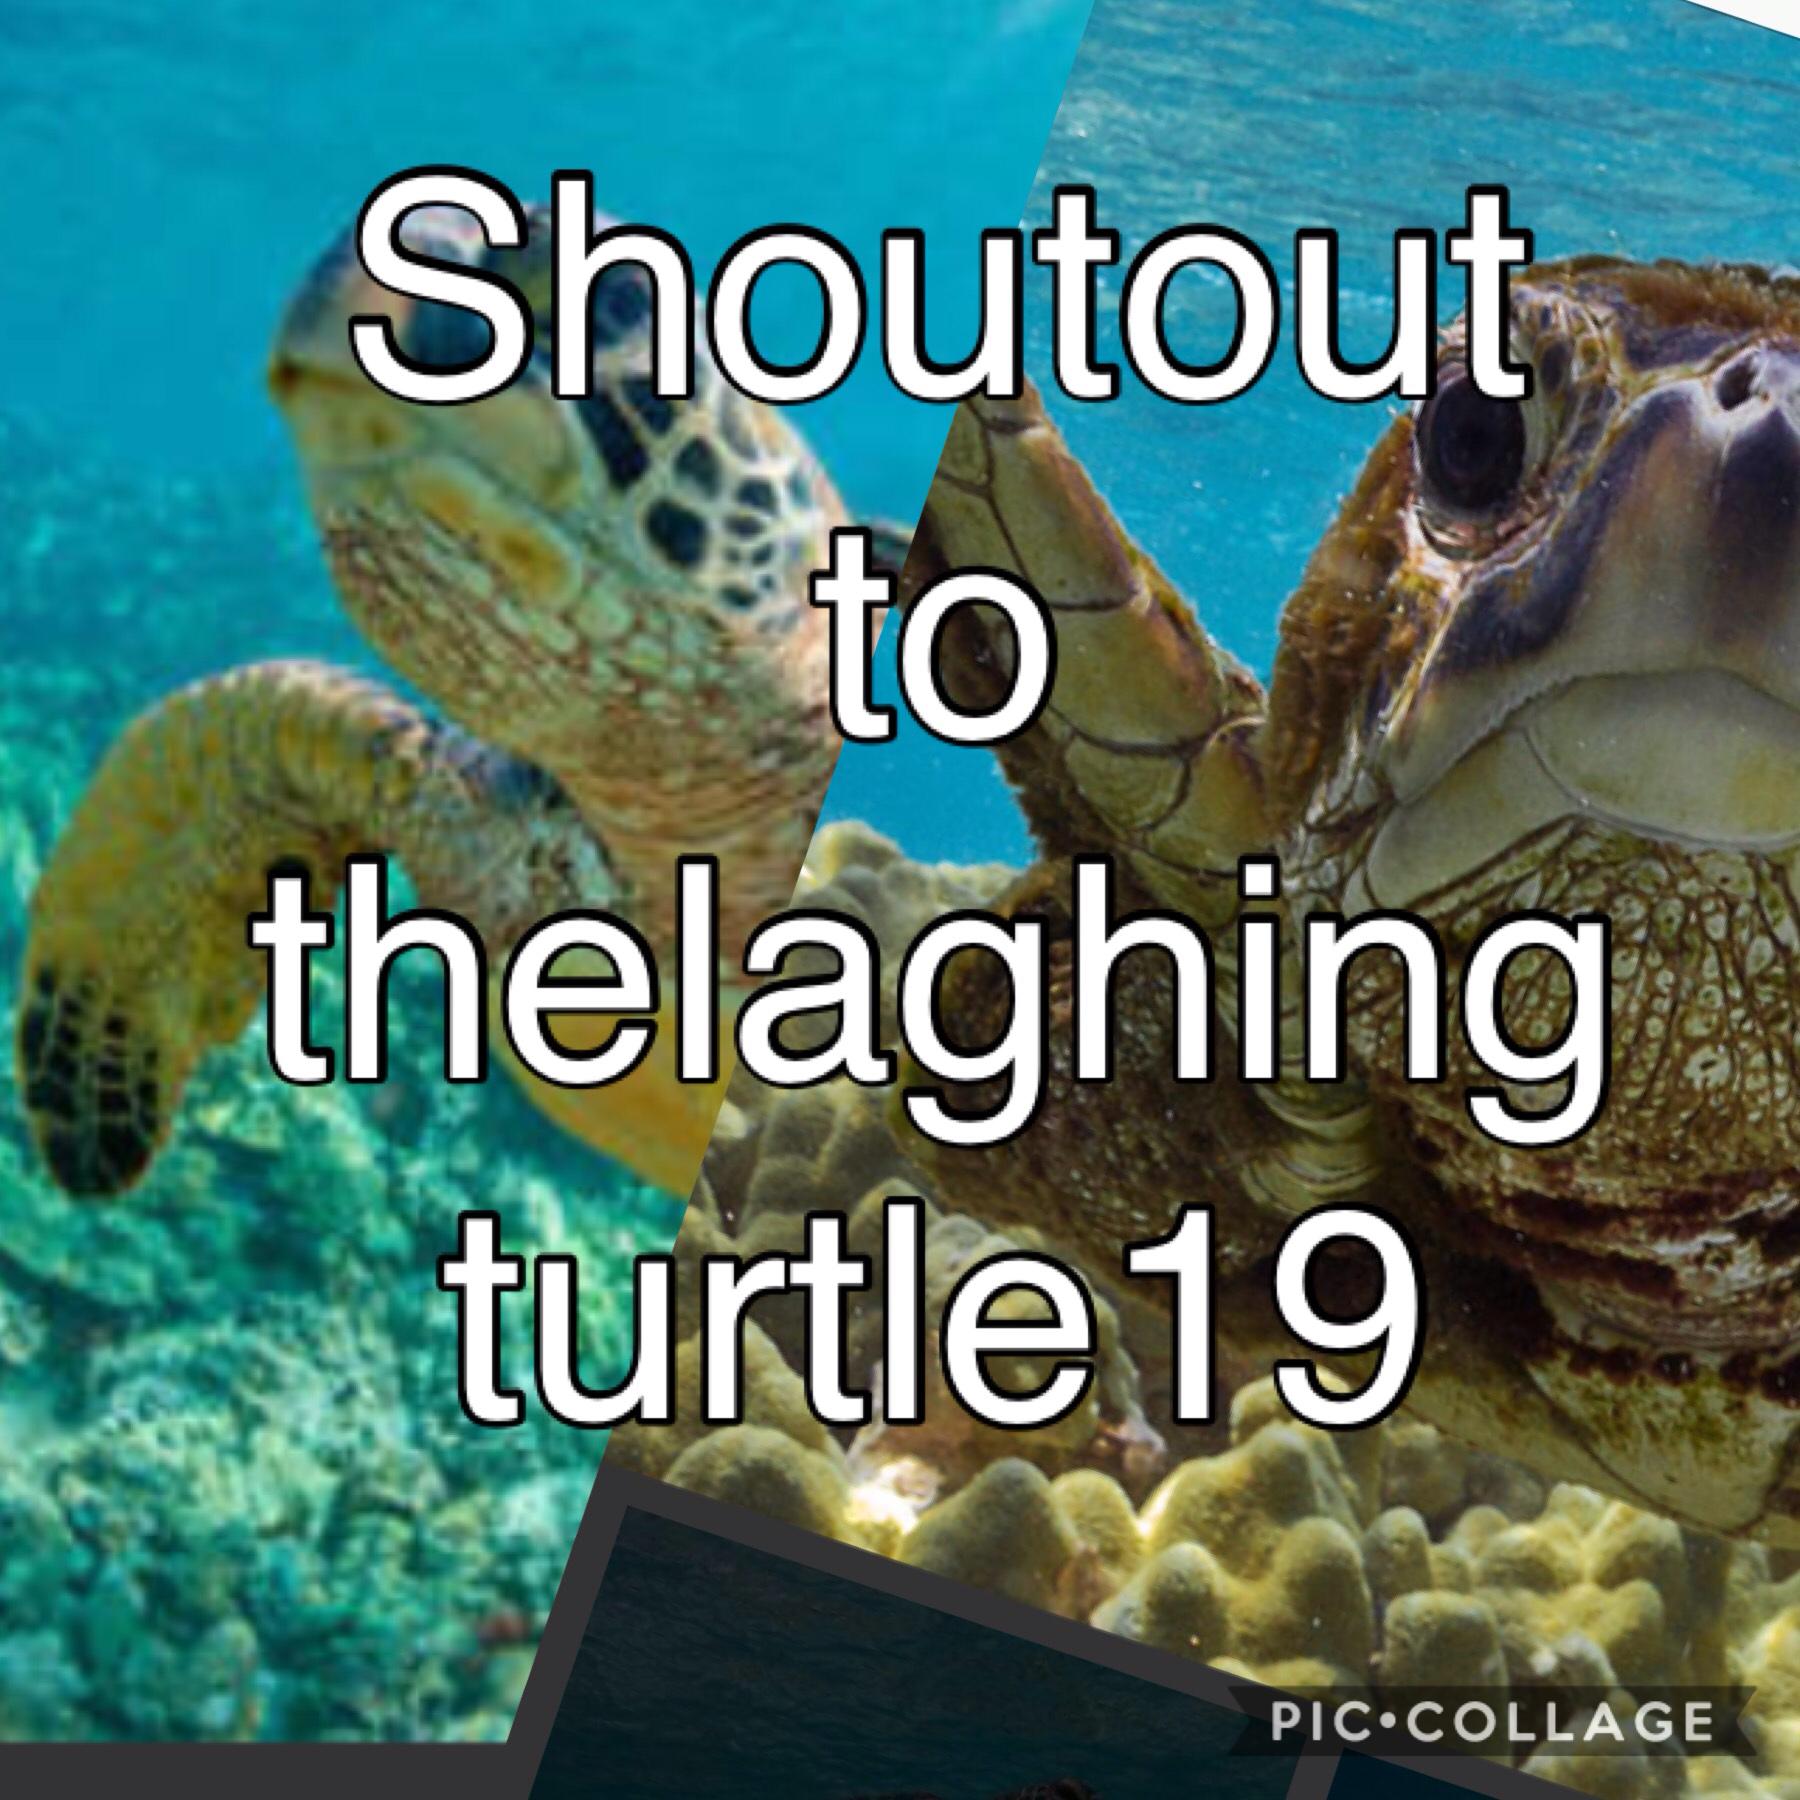 Shoutout to
Thelaghingturtle19